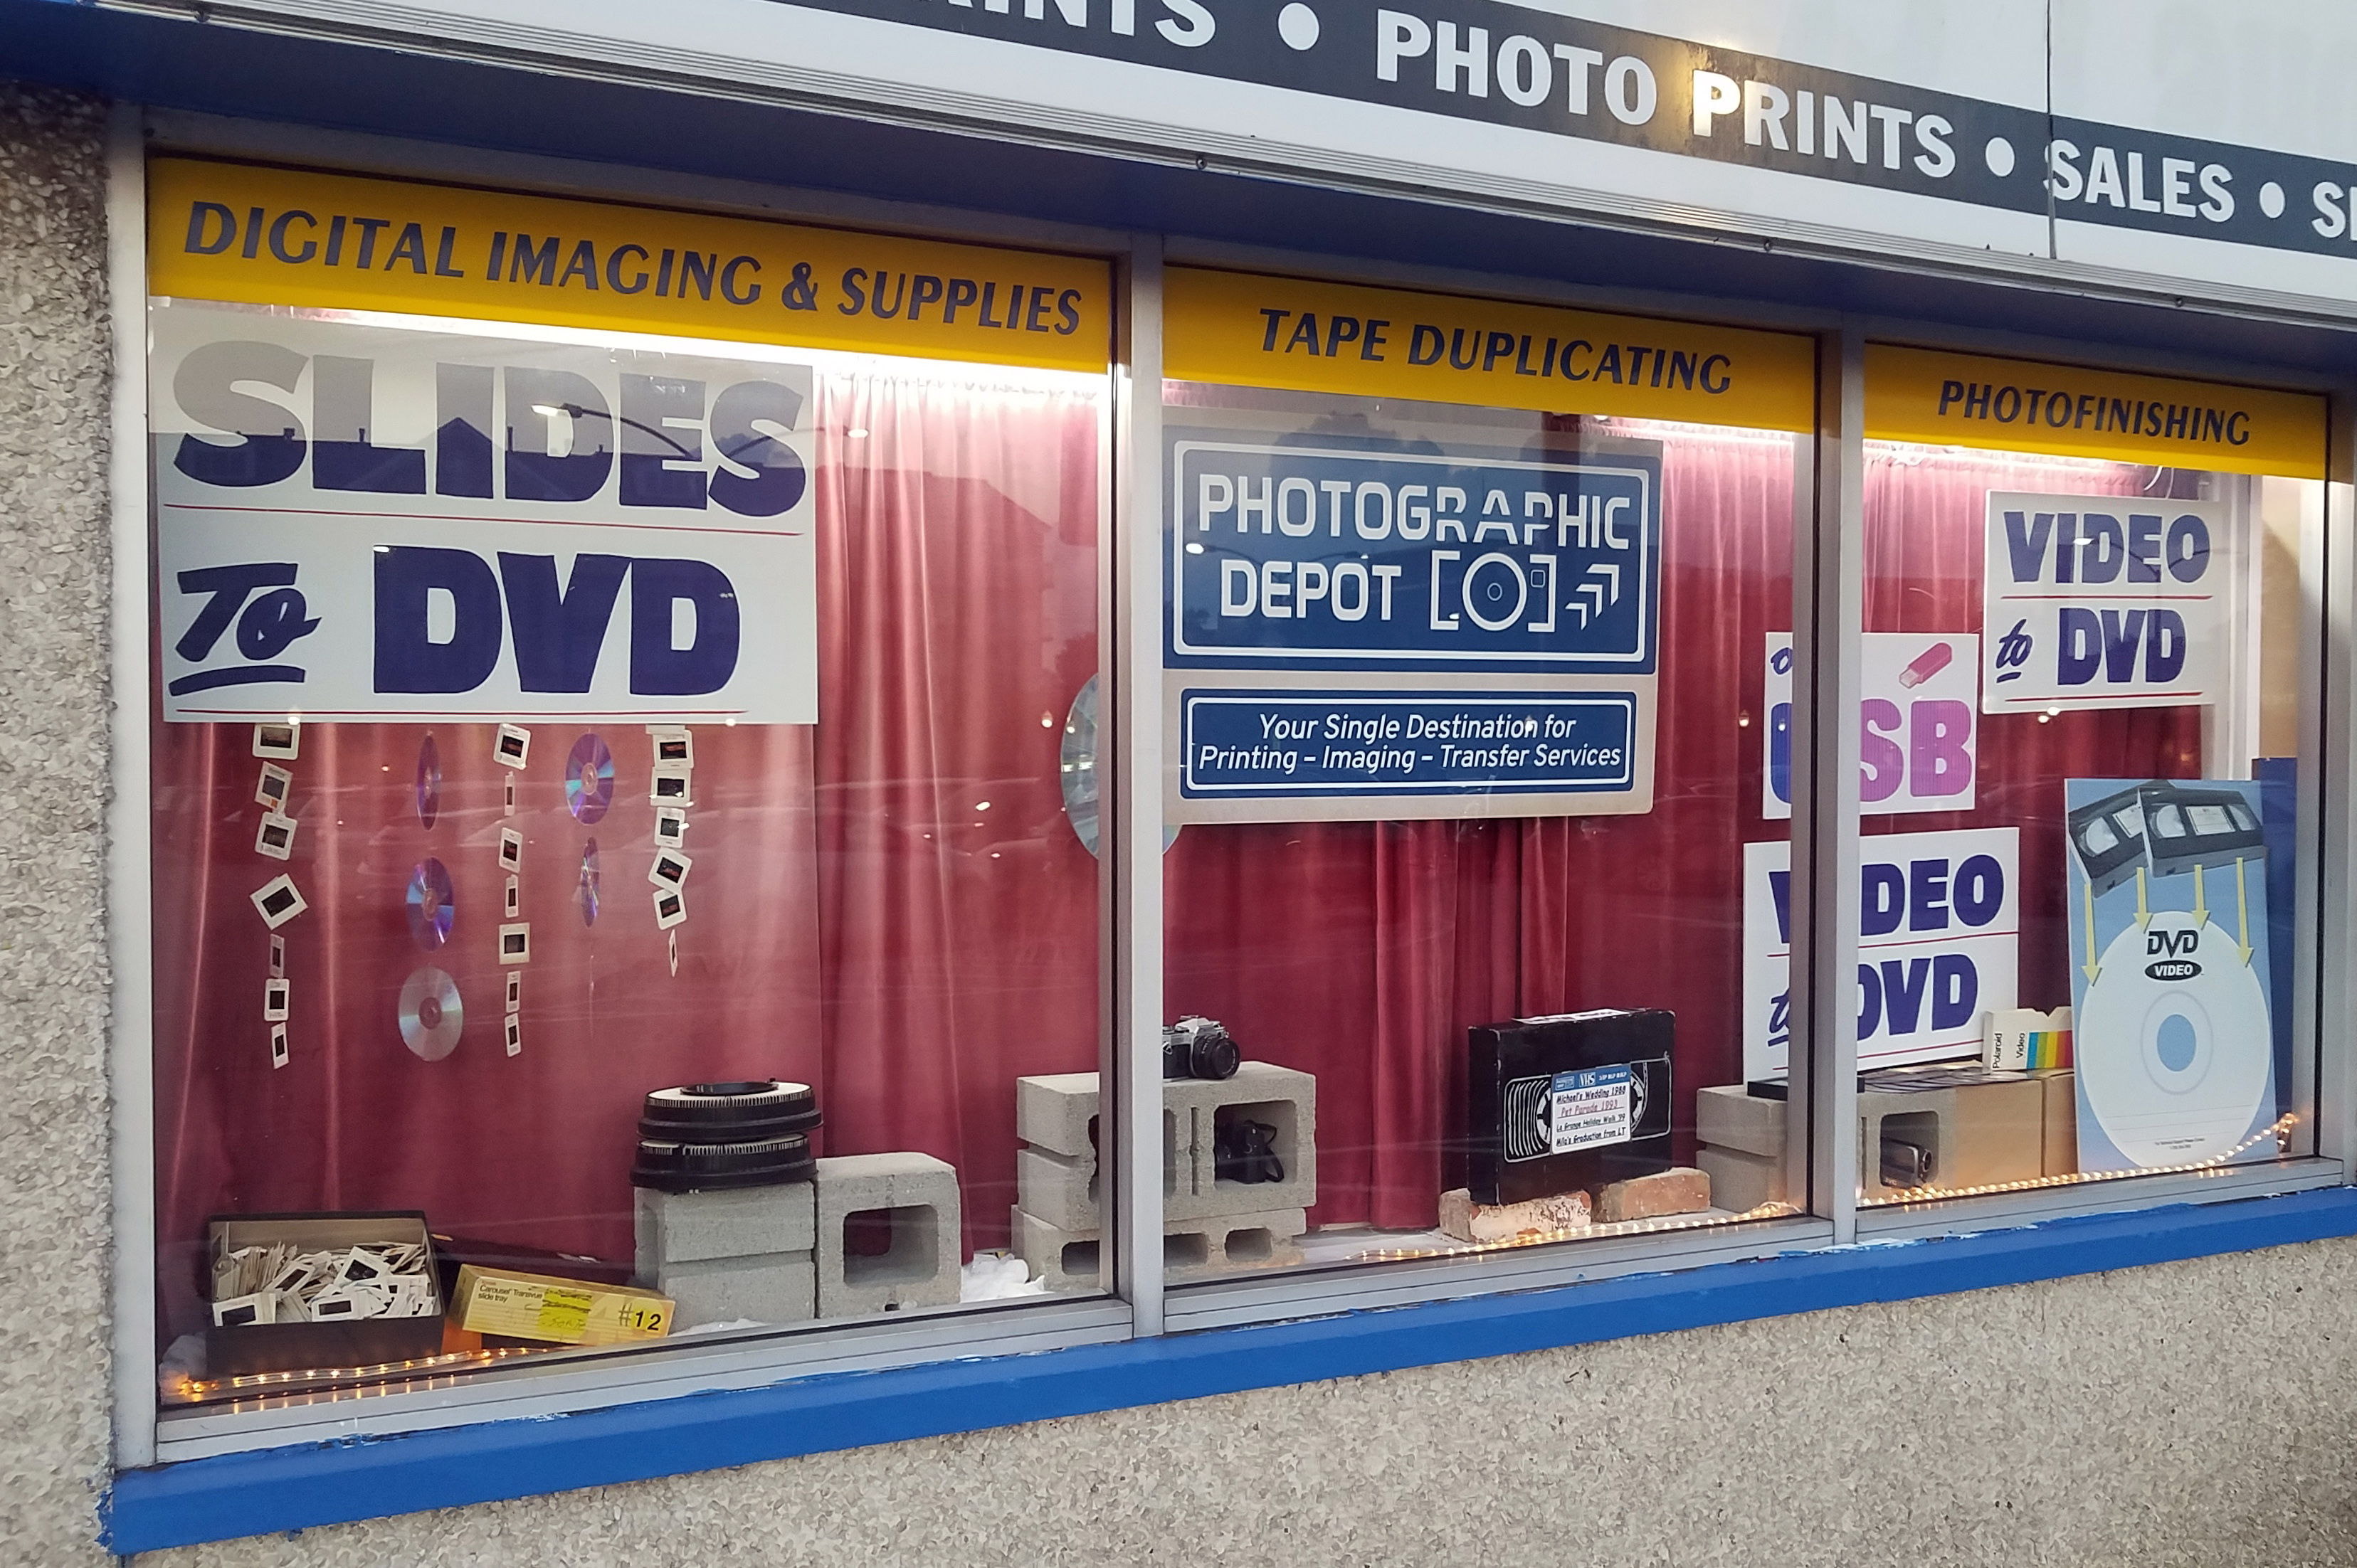 Stop in Photographic Depot today!